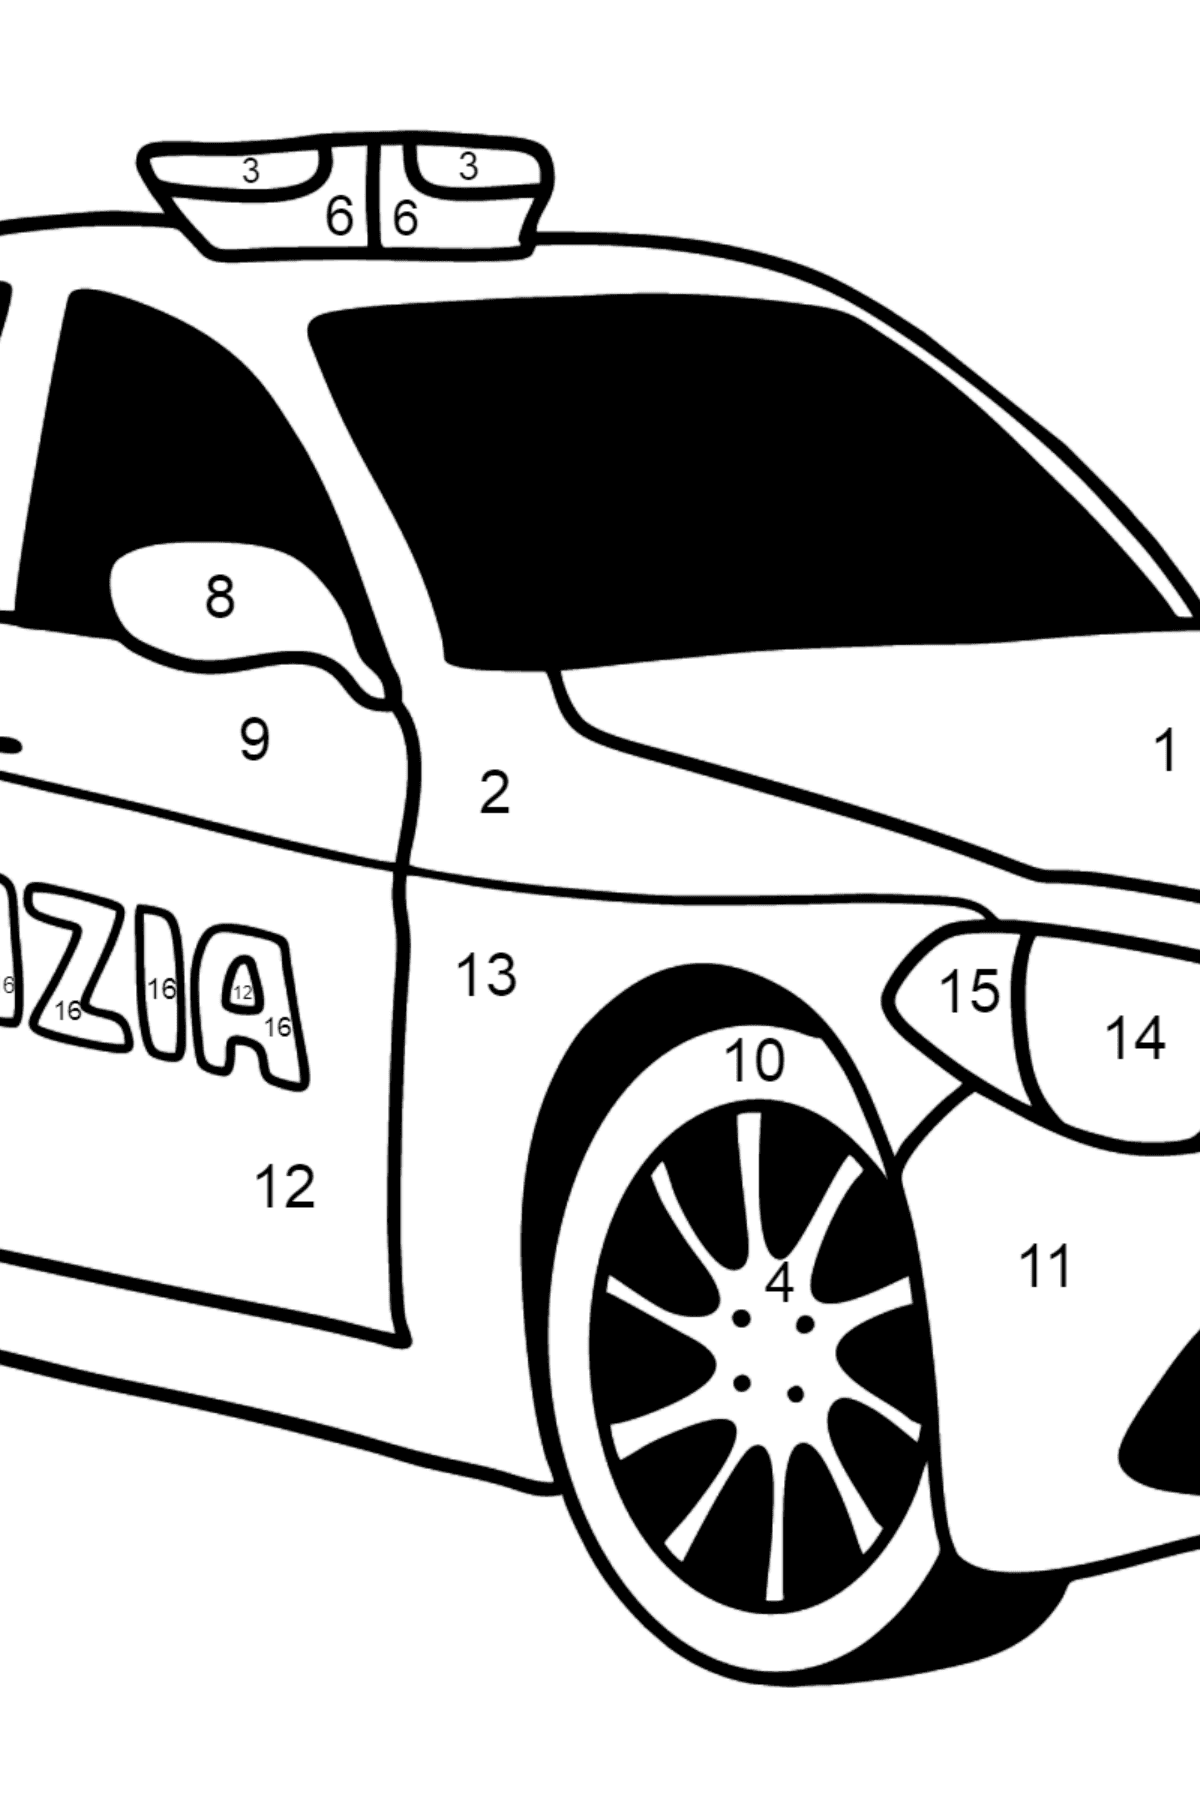 Police Car in Italy coloring page - Coloring by Numbers for Kids